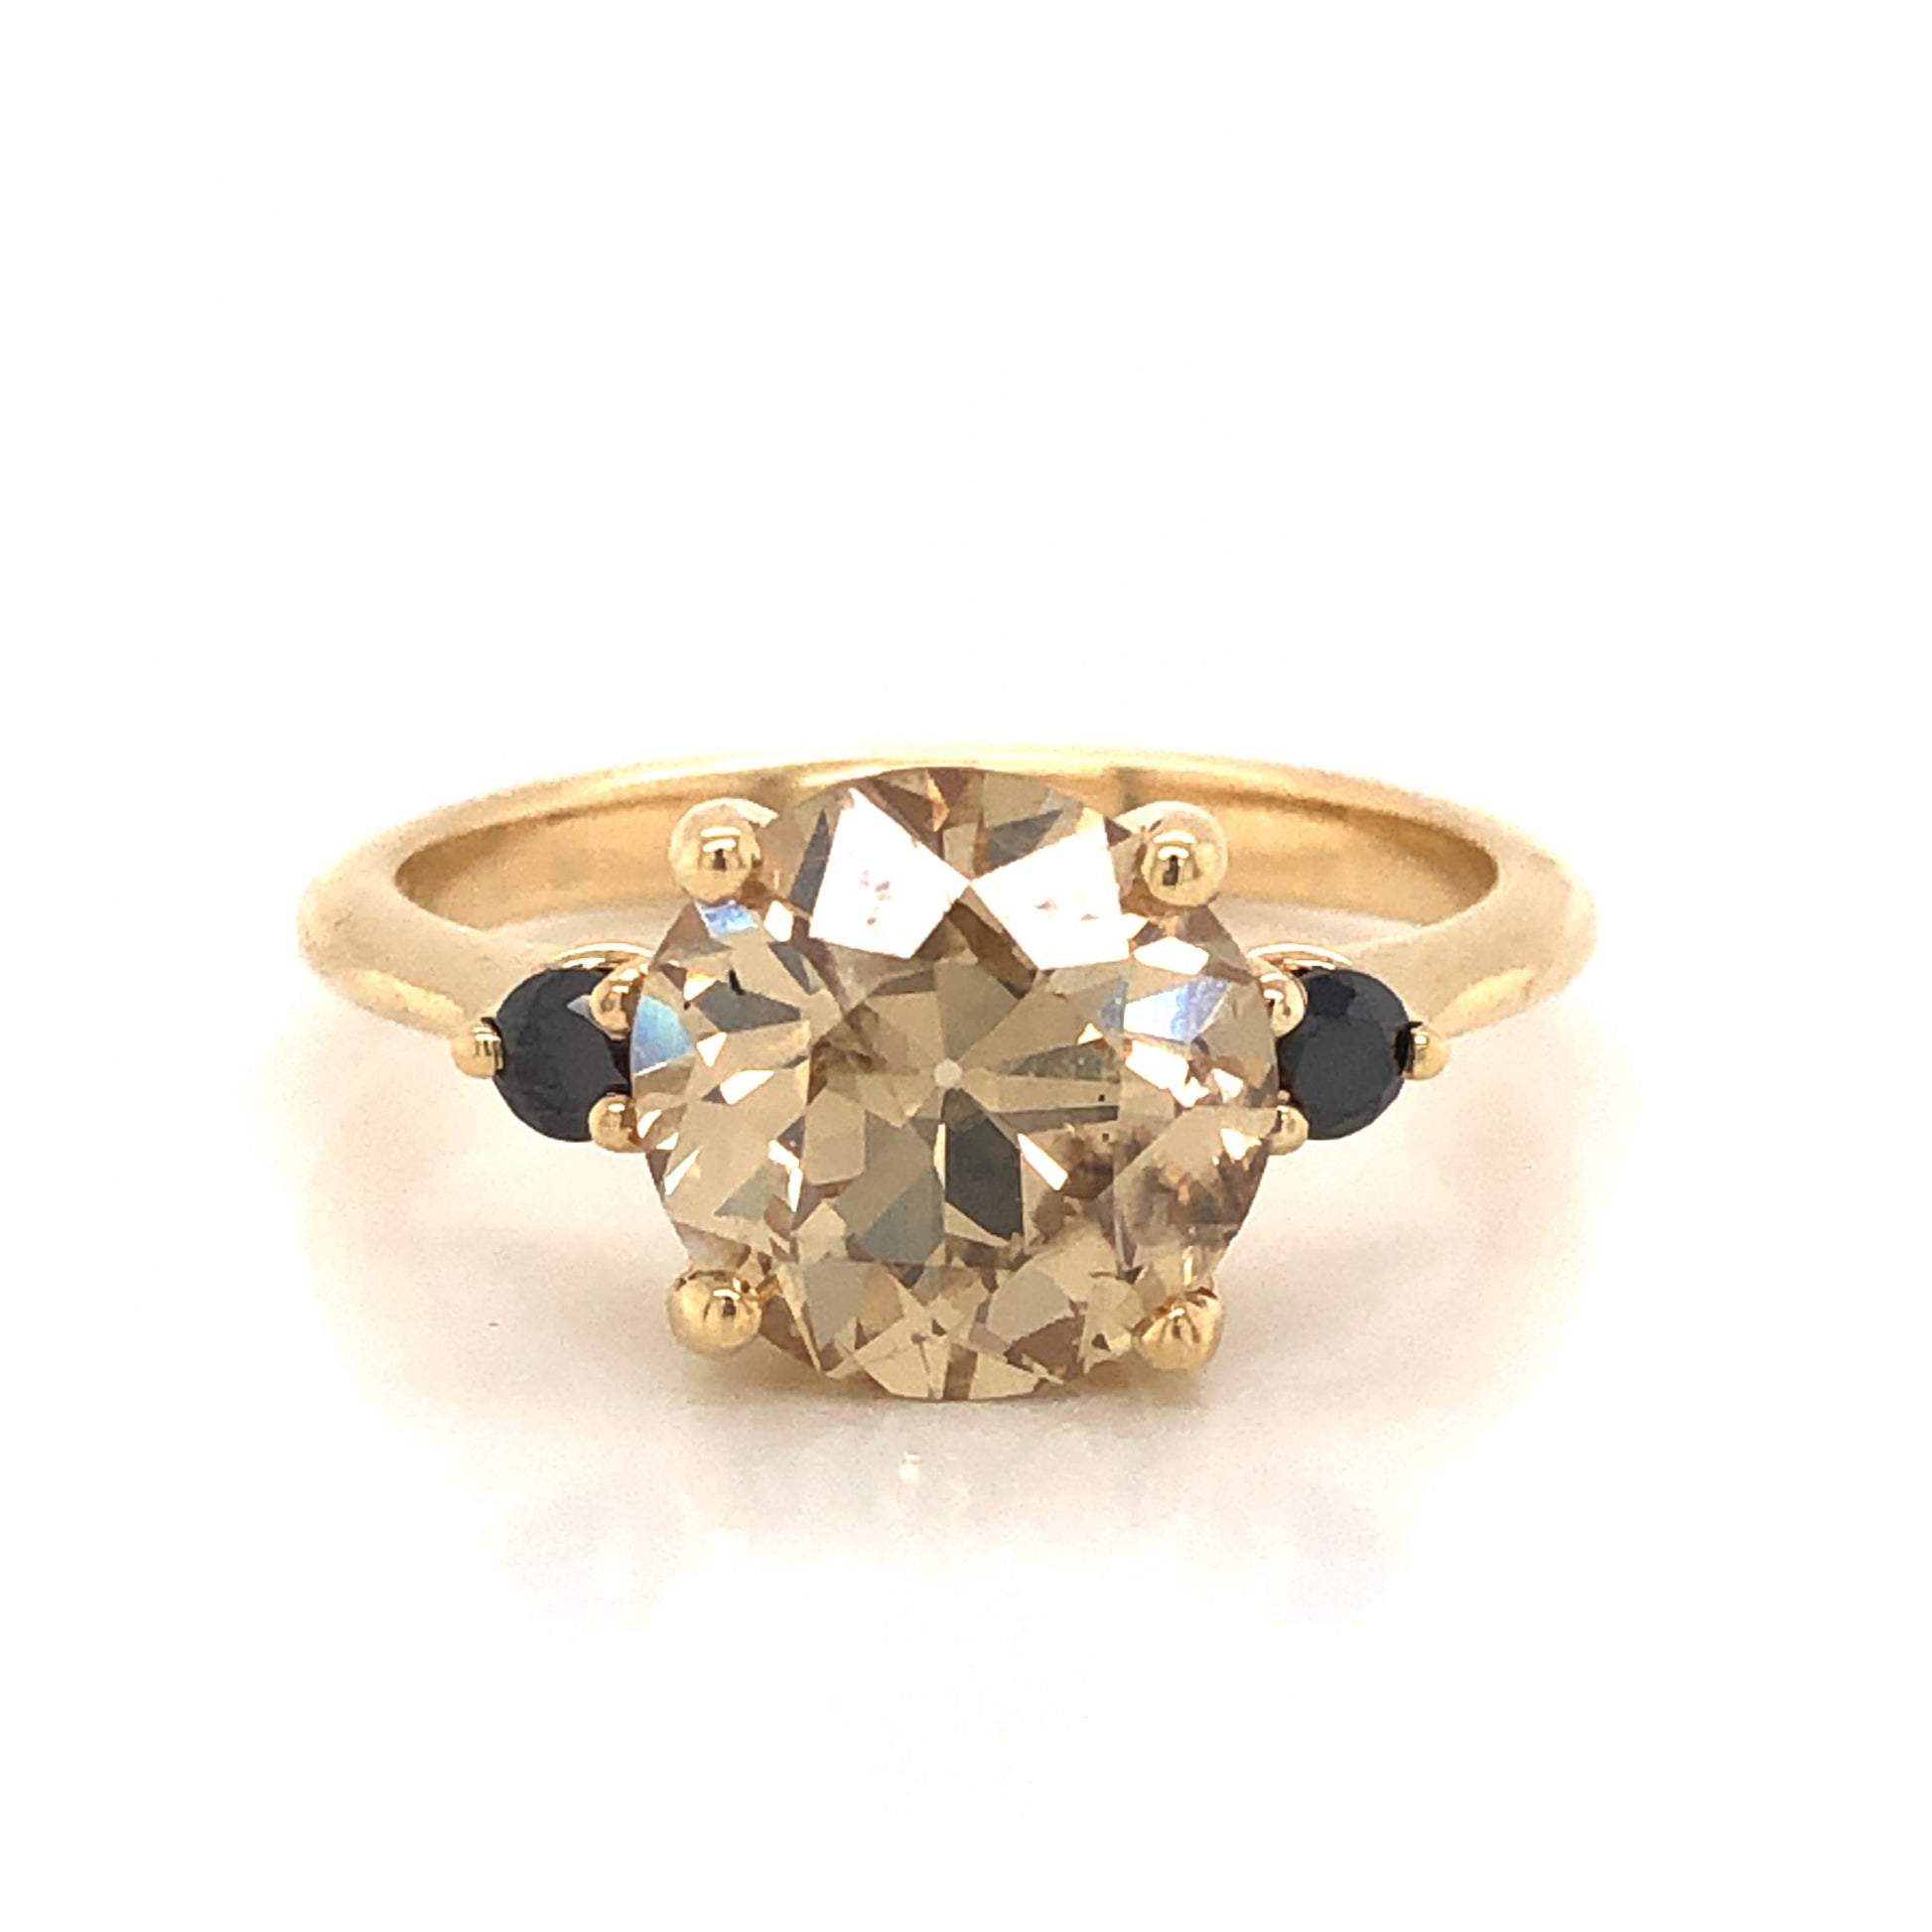 Fancy Light Brown Diamond Engagement Ring in 14k Yellow GoldComposition: 14 Karat Yellow GoldRing Size: 6.5Total Diamond Weight: 2.87 ctTotal Gram Weight: 3.6 gInscription: 14k 